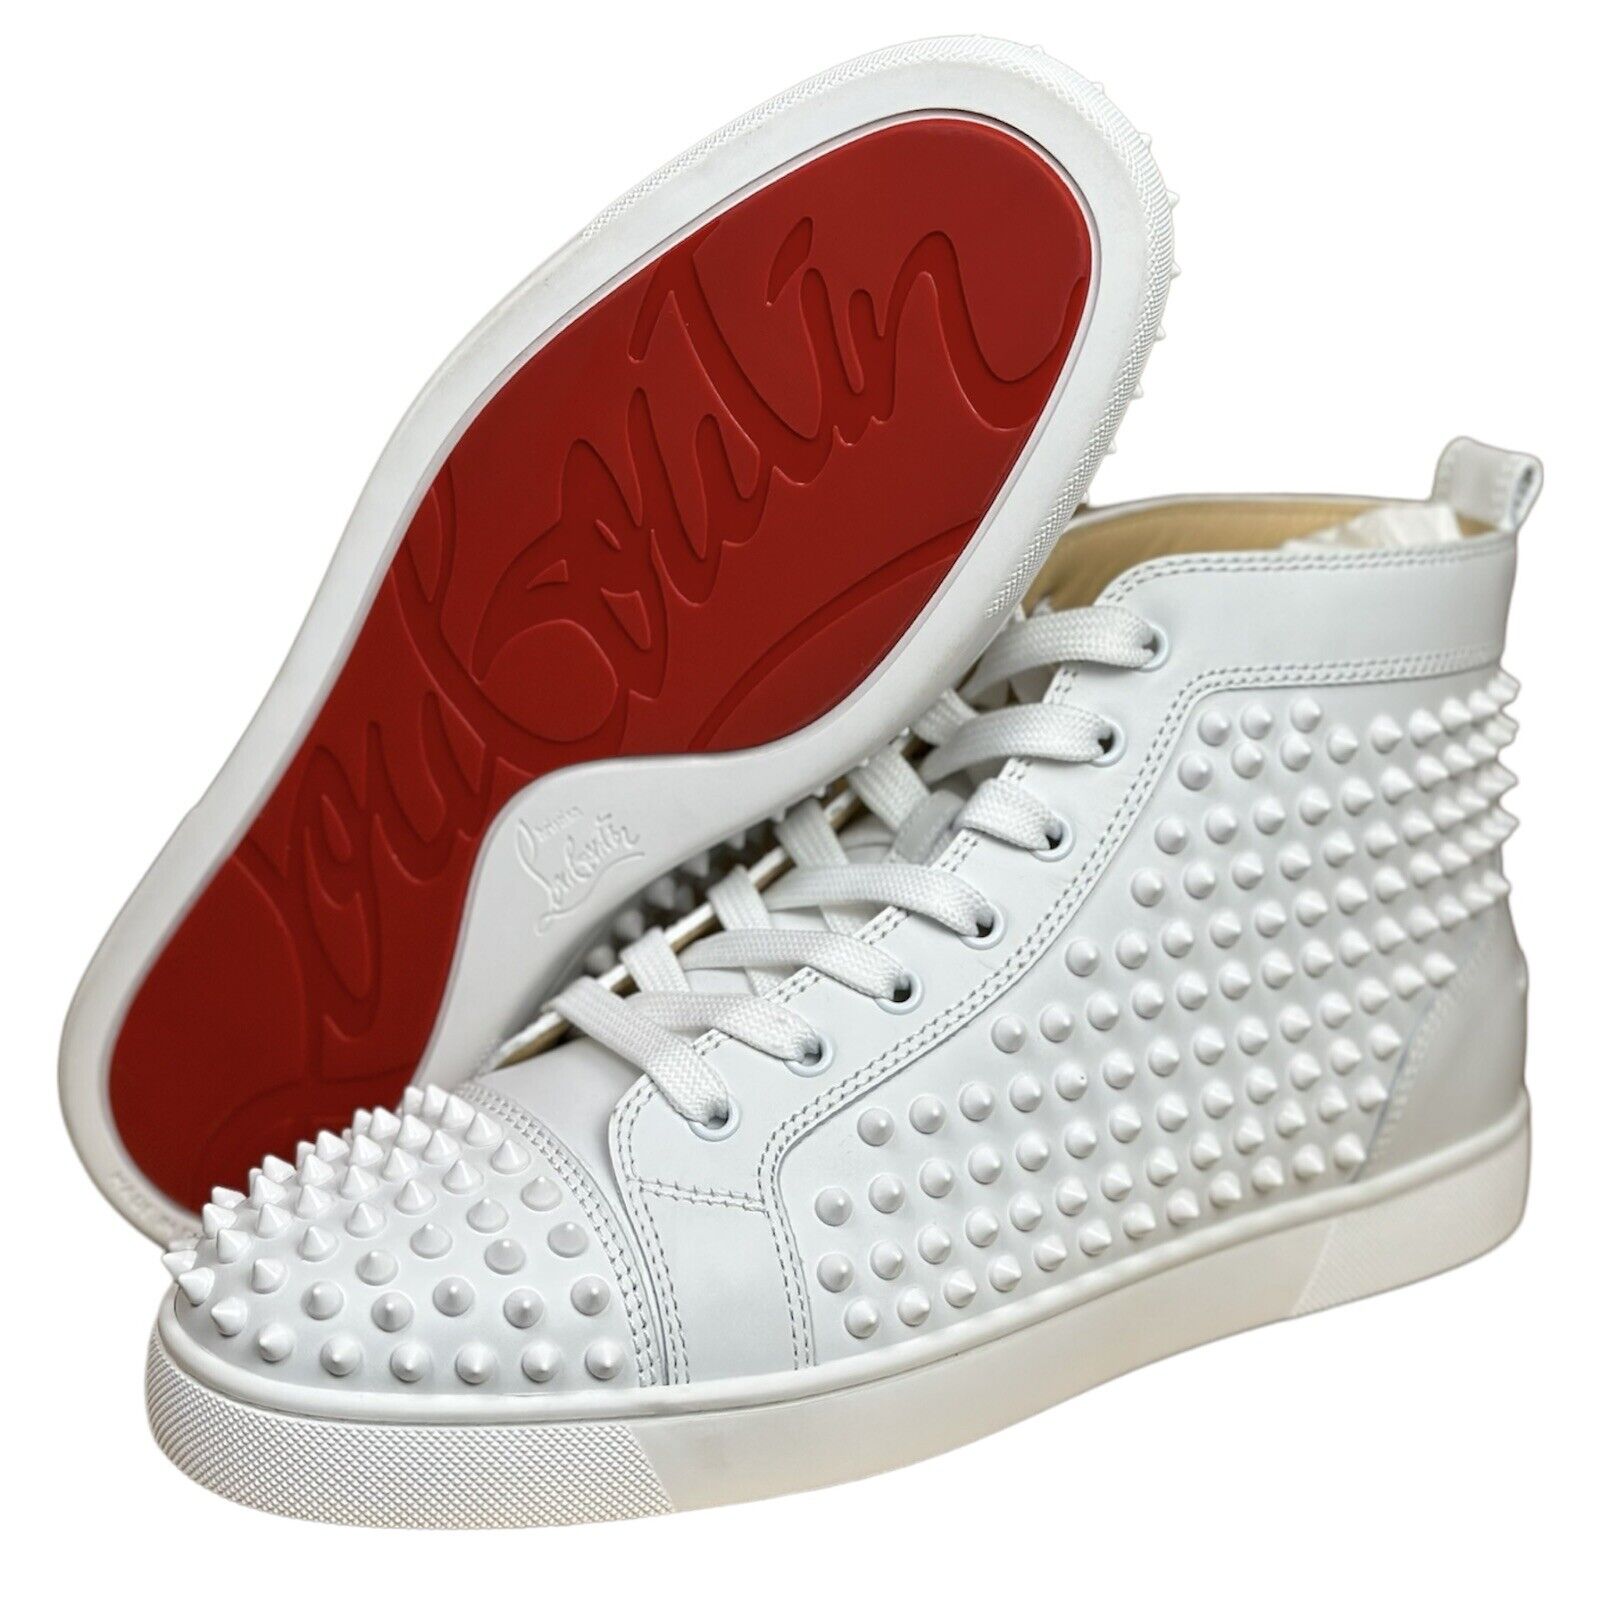 Christian Louboutin High Top Spikes Sneakers White Size 42 US 9 With Box  Mint.